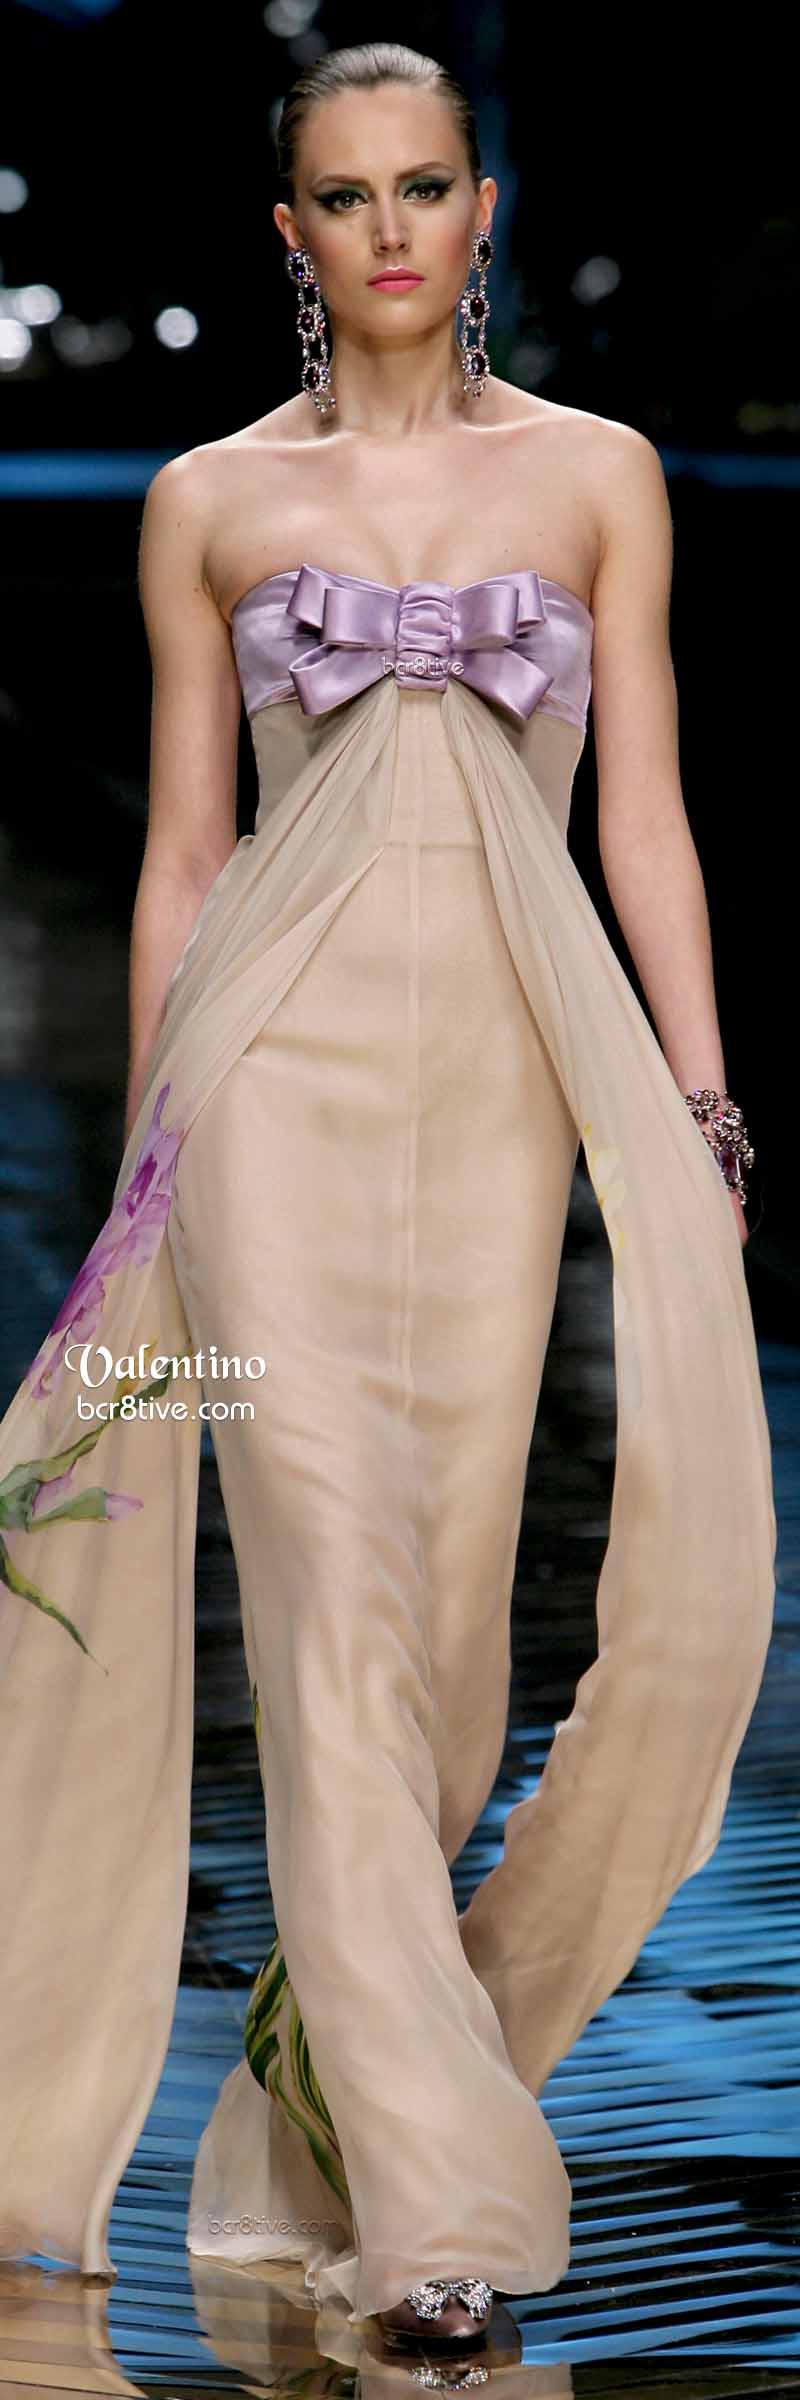 Valentino Long Bow Tied Evening Gown